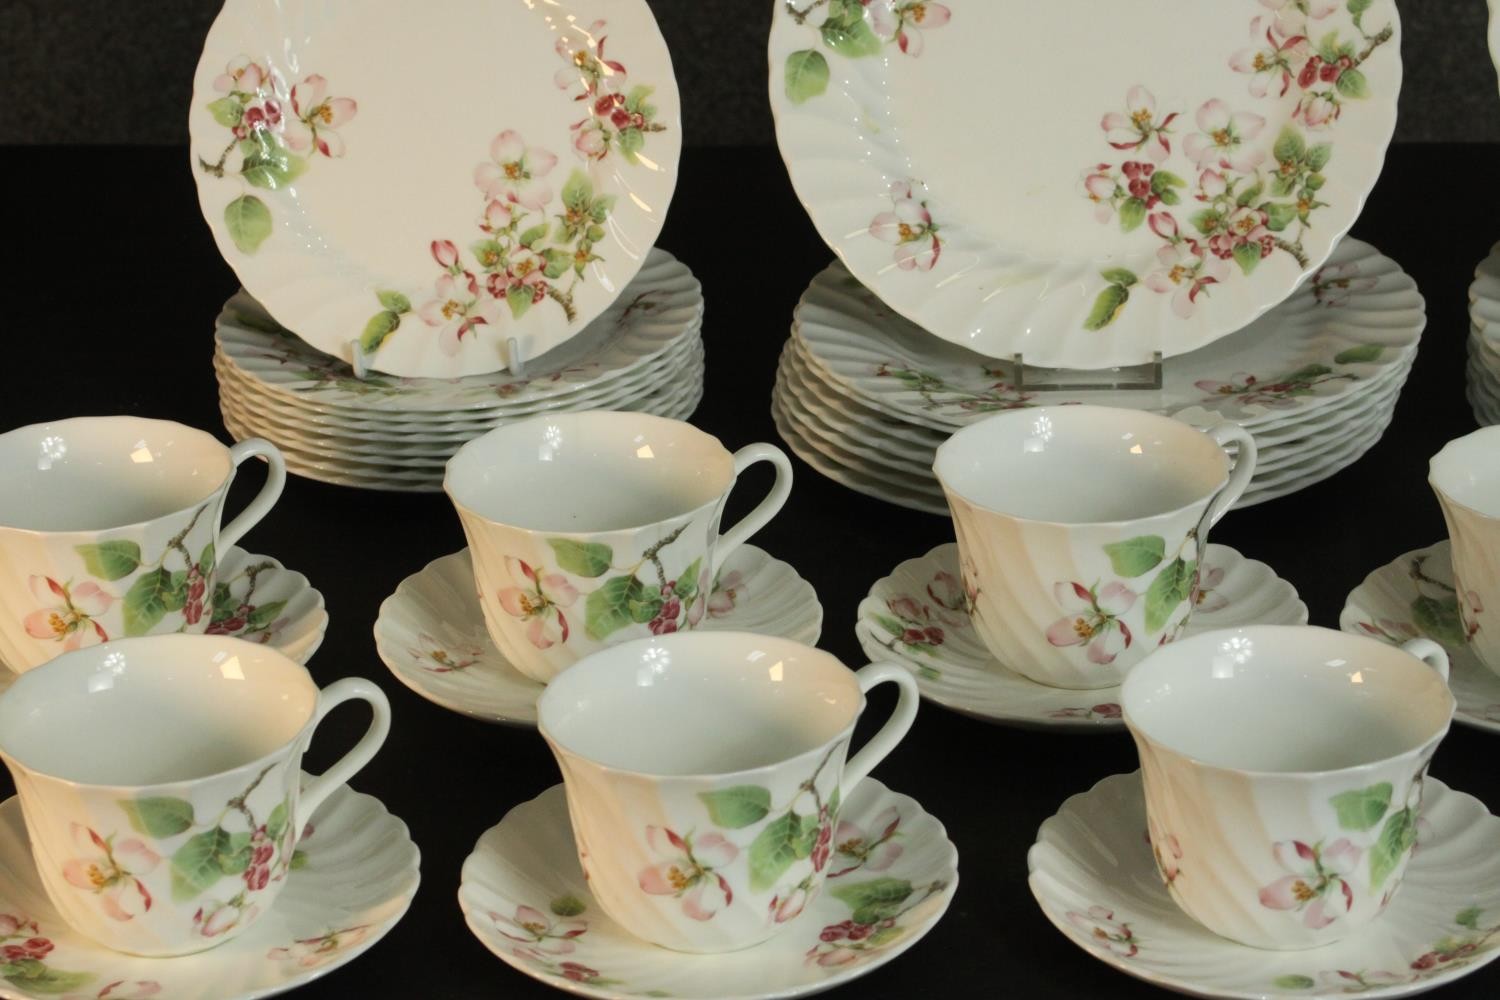 A 20th century Wedgwood Apple Blossom dinner and tea set (one cup missing) 47pieces. Largest piece - Image 2 of 14